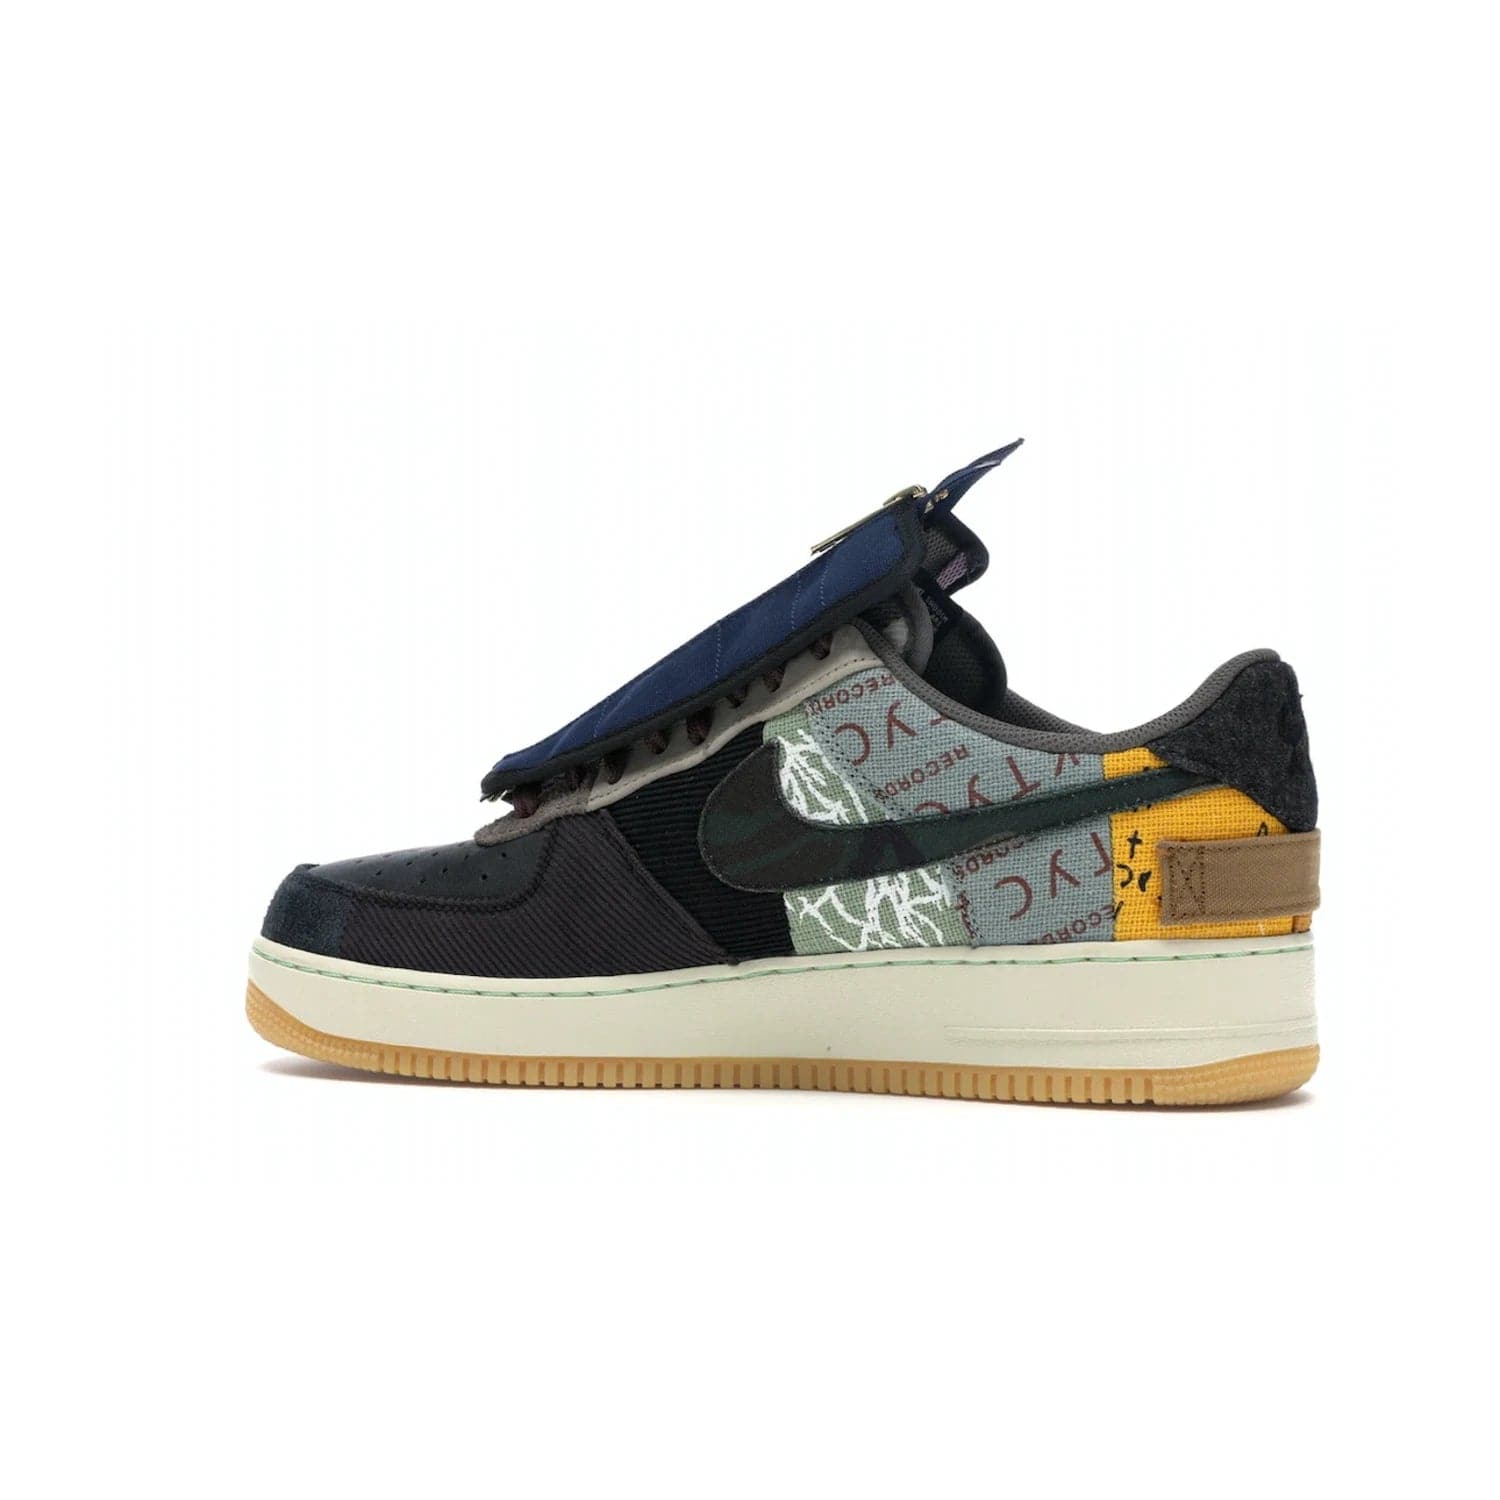 Nike Air Force 1 Low Travis Scott Cactus Jack - Image 21 - Only at www.BallersClubKickz.com - The Nike Air Force 1 Low Travis Scott Cactus Jack features a unique, multi-colored patchwork upper with muted bronze and fossil accents. Includes detachable lace cover, brass zipper, and Cactus Jack insignias. A sail midsole, gum rubber outsole complete the eye-catching design. Perfect for comfort and style with unexpected touches of detail.